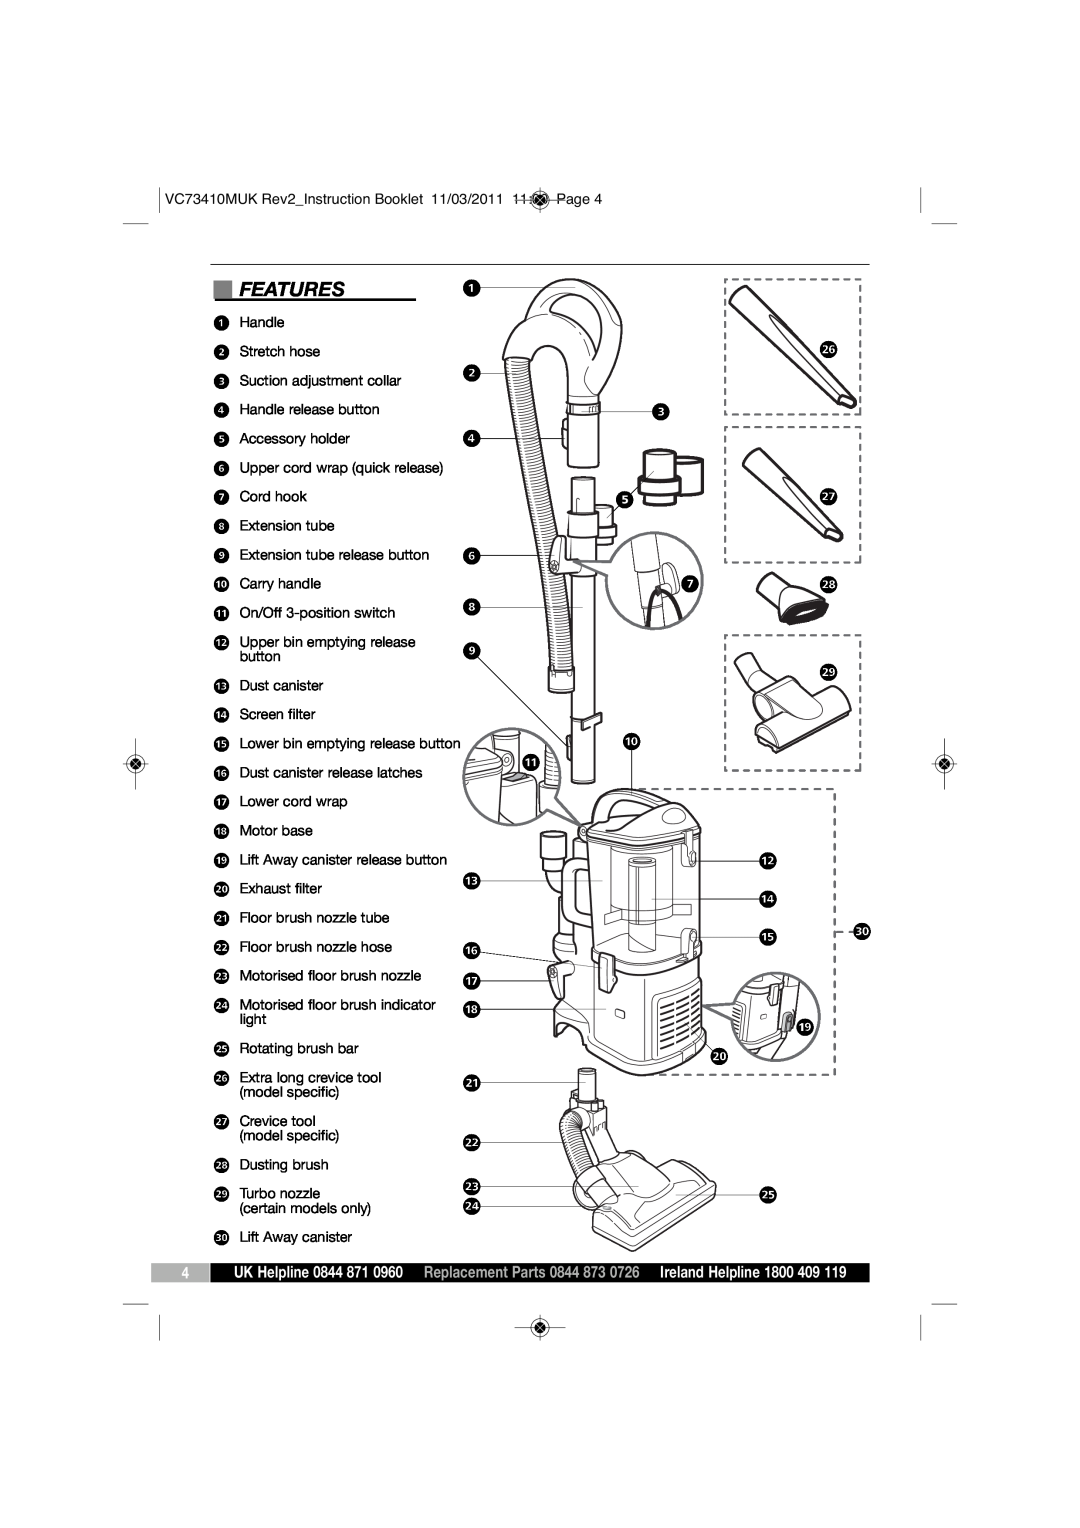 Morphy Richards VC7341DMUK manual Features ⁄ 